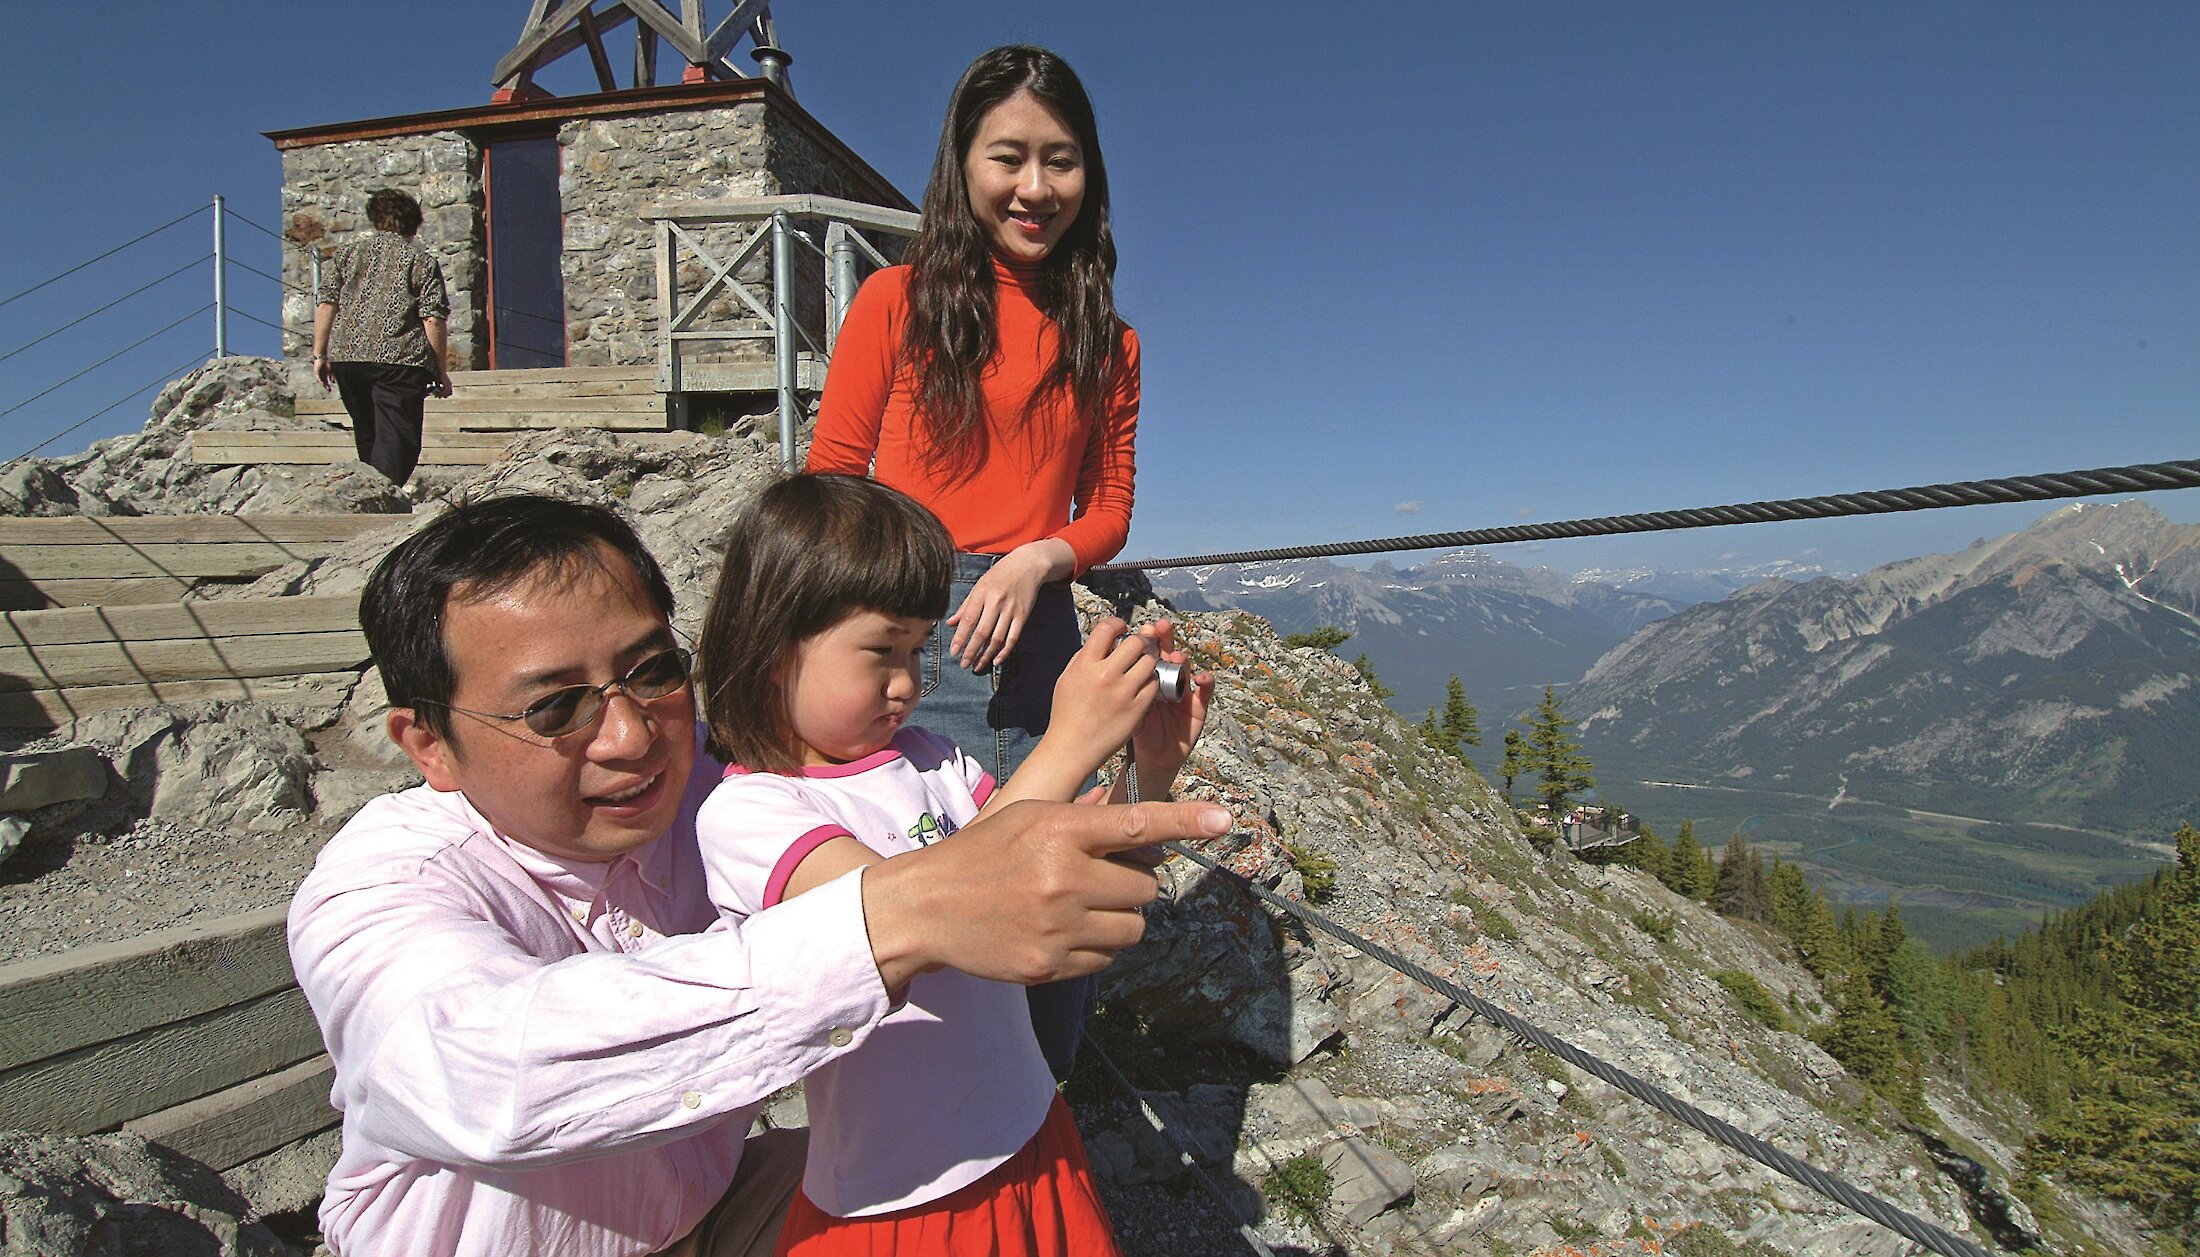 A family taking a photo at the Cosmic Ray Station at the Banff Gondola